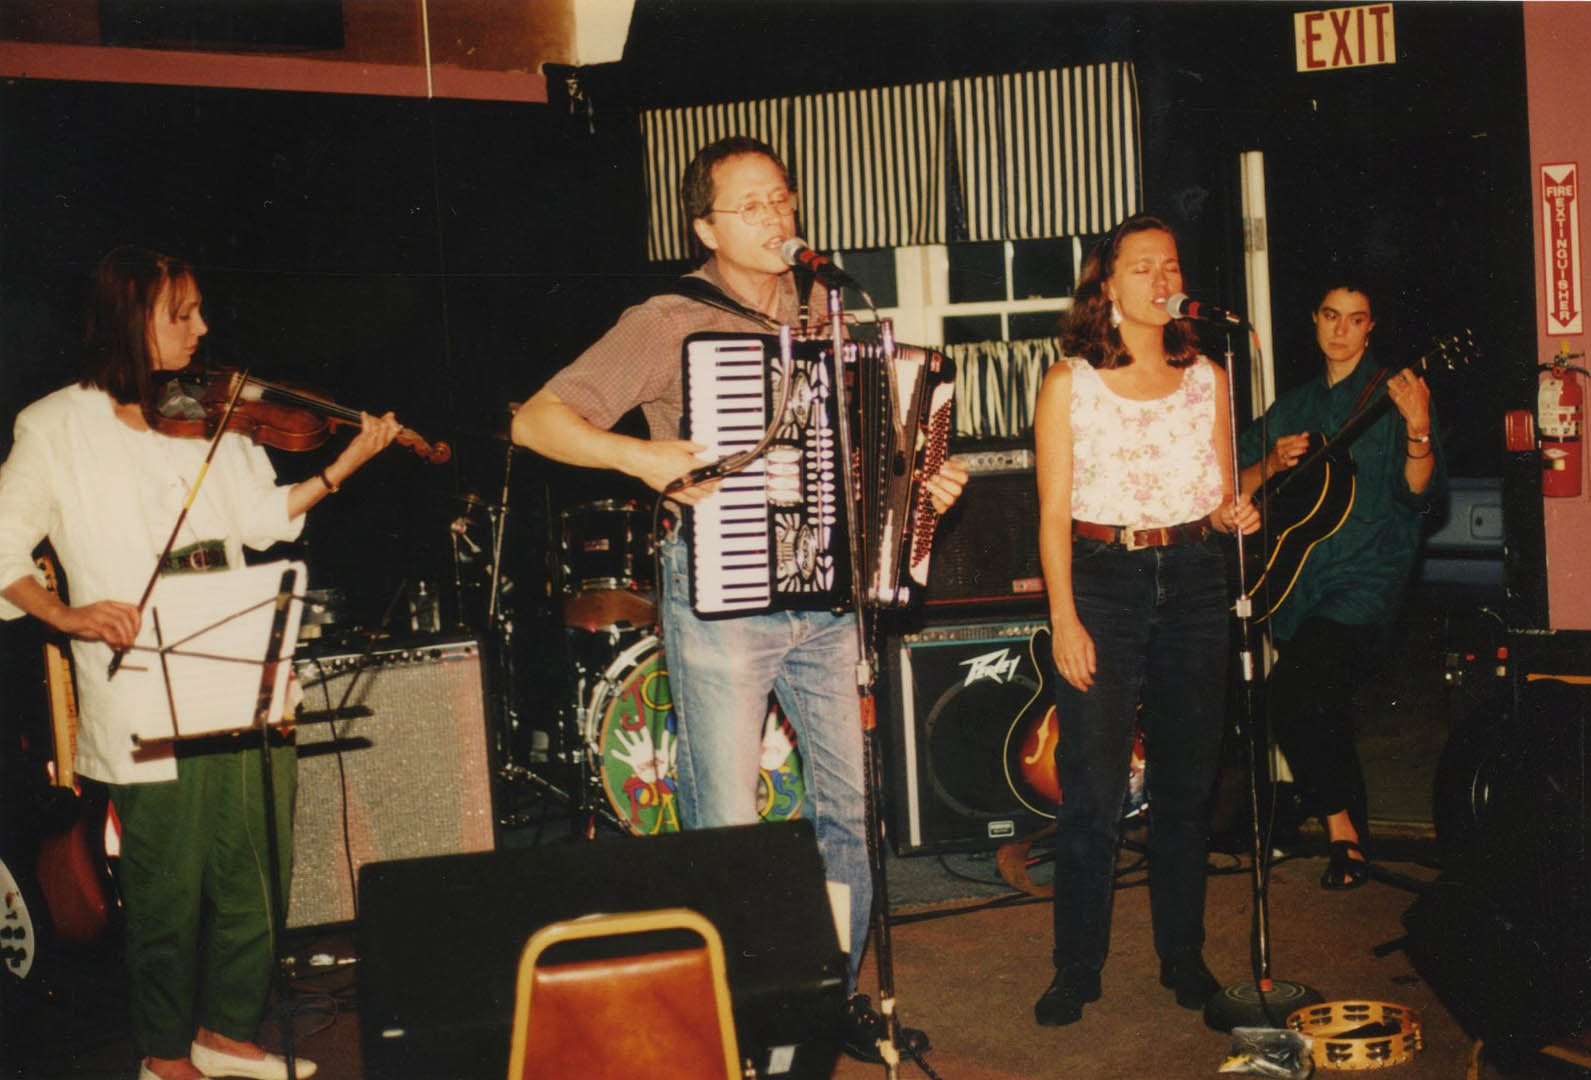 The Cowlix front line during the 1992 opening gig for the Moxie Men at Norton\'s in Kittery. From left, Melinda McCardell, Doug Hubley, Marcia Goldenberg, Gretchen Schaefer. Not visible is drummer Jonathan Nichols-Pethick. Photo by Jeff Stanton.